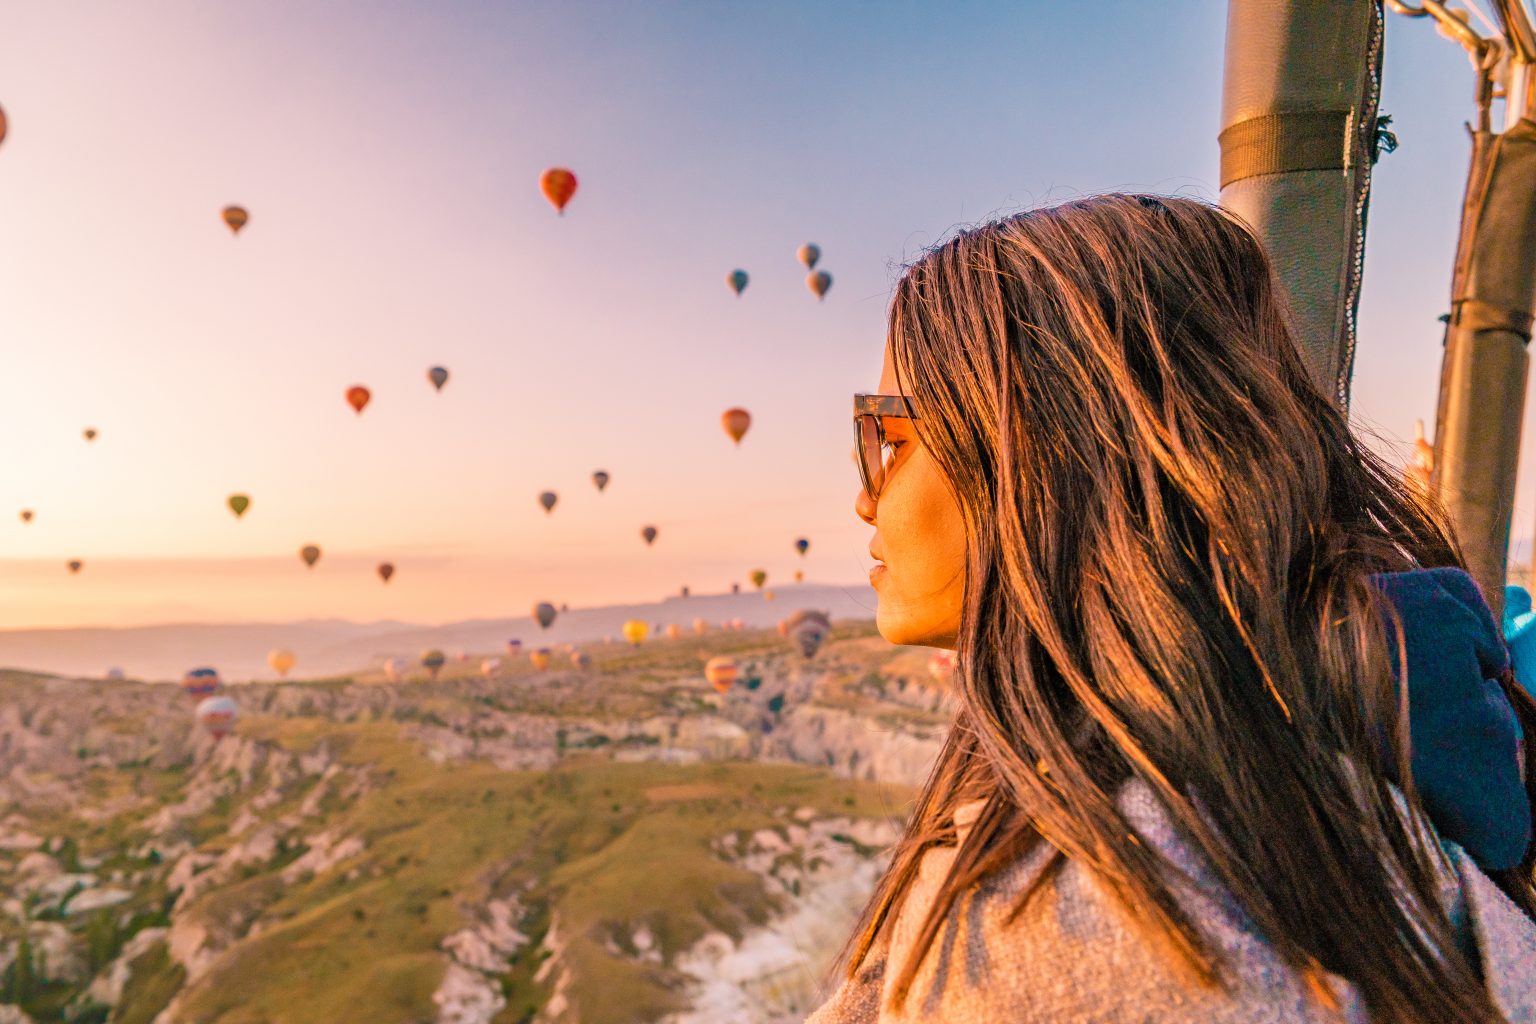 Cappadocia- Experience Hot Air Balloon With A Blend Of History And Culture